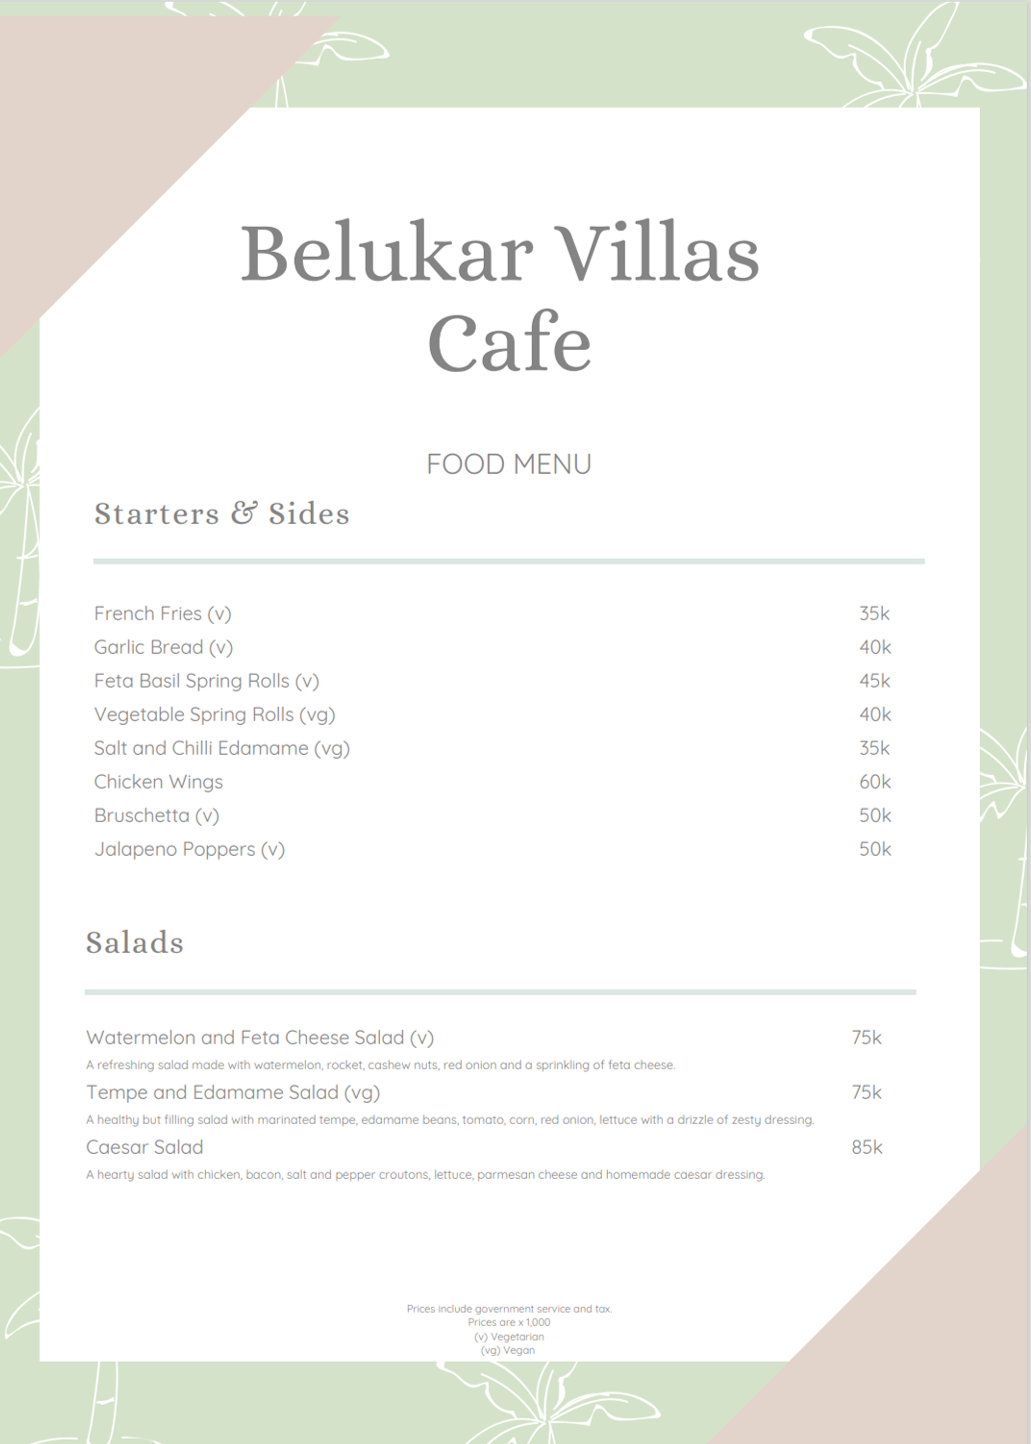 https://cloudmixer.gracepl.us/sites/belukarvillas.com/files/pictures/Cafe%20and%20menu/Cafe%20page%201.png